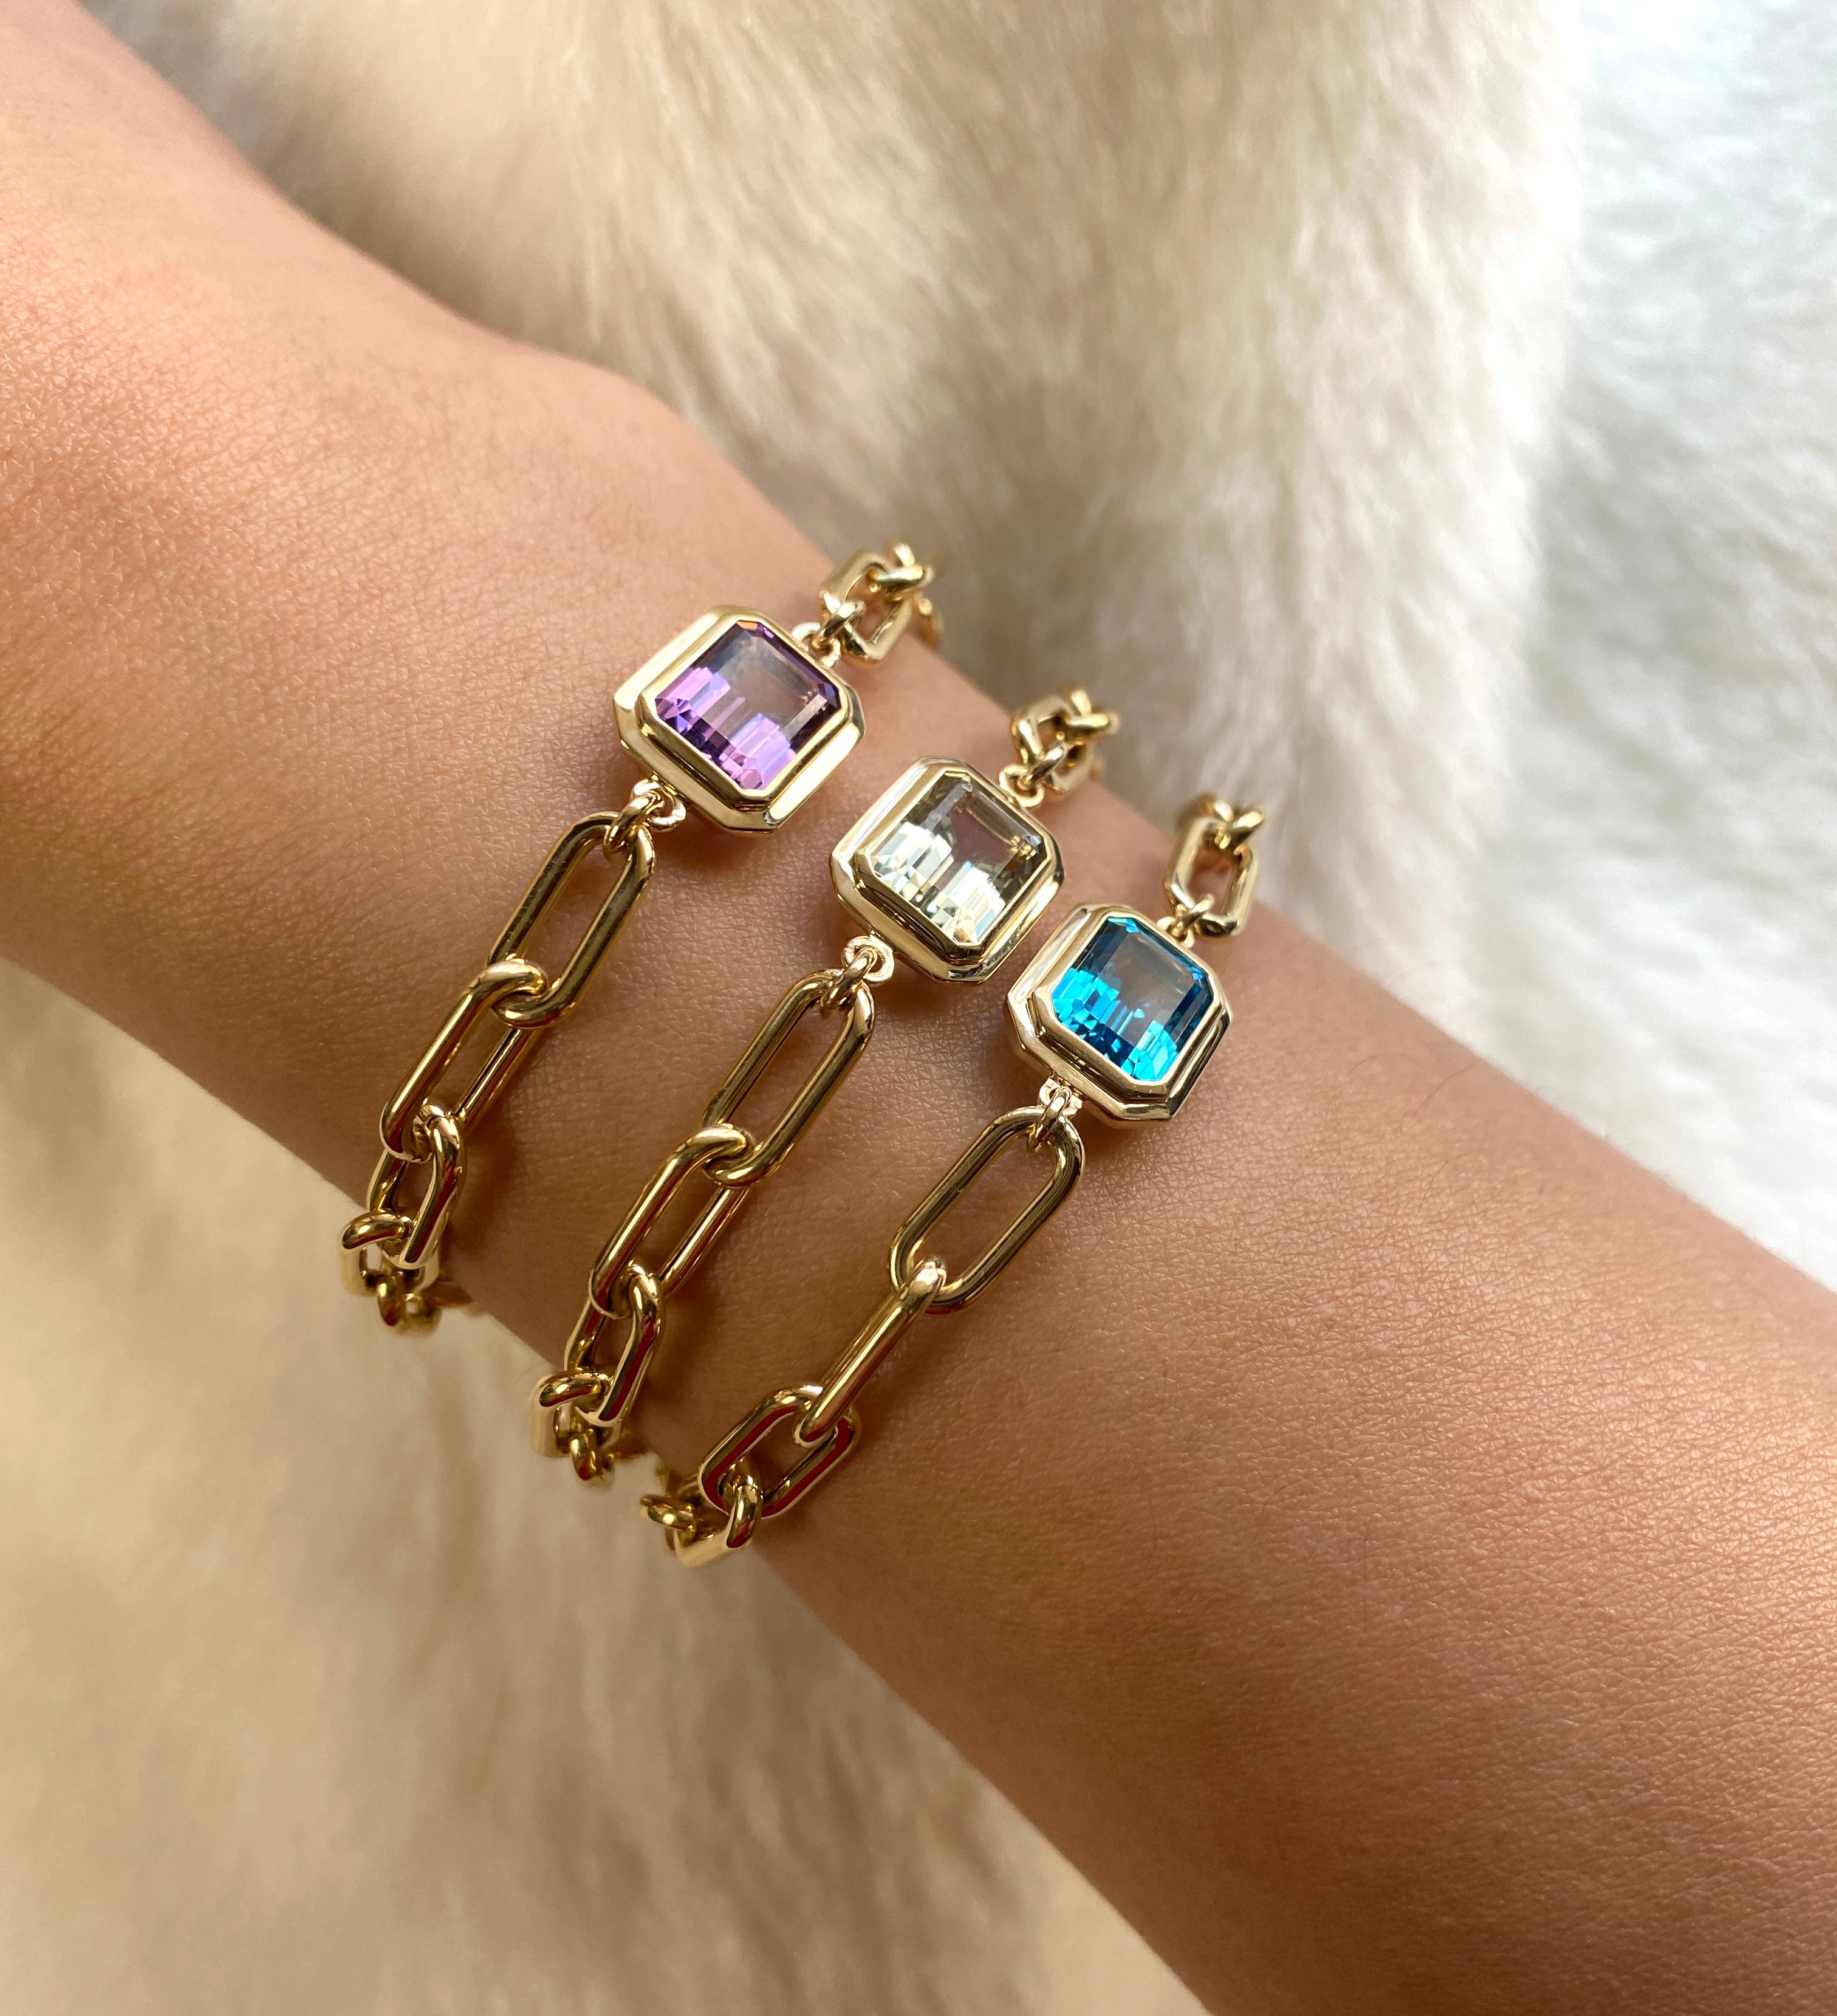 Elevate your style with the Blue Topaz Emerald Cut Bezel Set Bracelet in 18K Yellow Gold from our captivating 'Manhattan' Collection. Merging minimalist elegance with confident design, this bracelet captures the essence of New York City's iconic